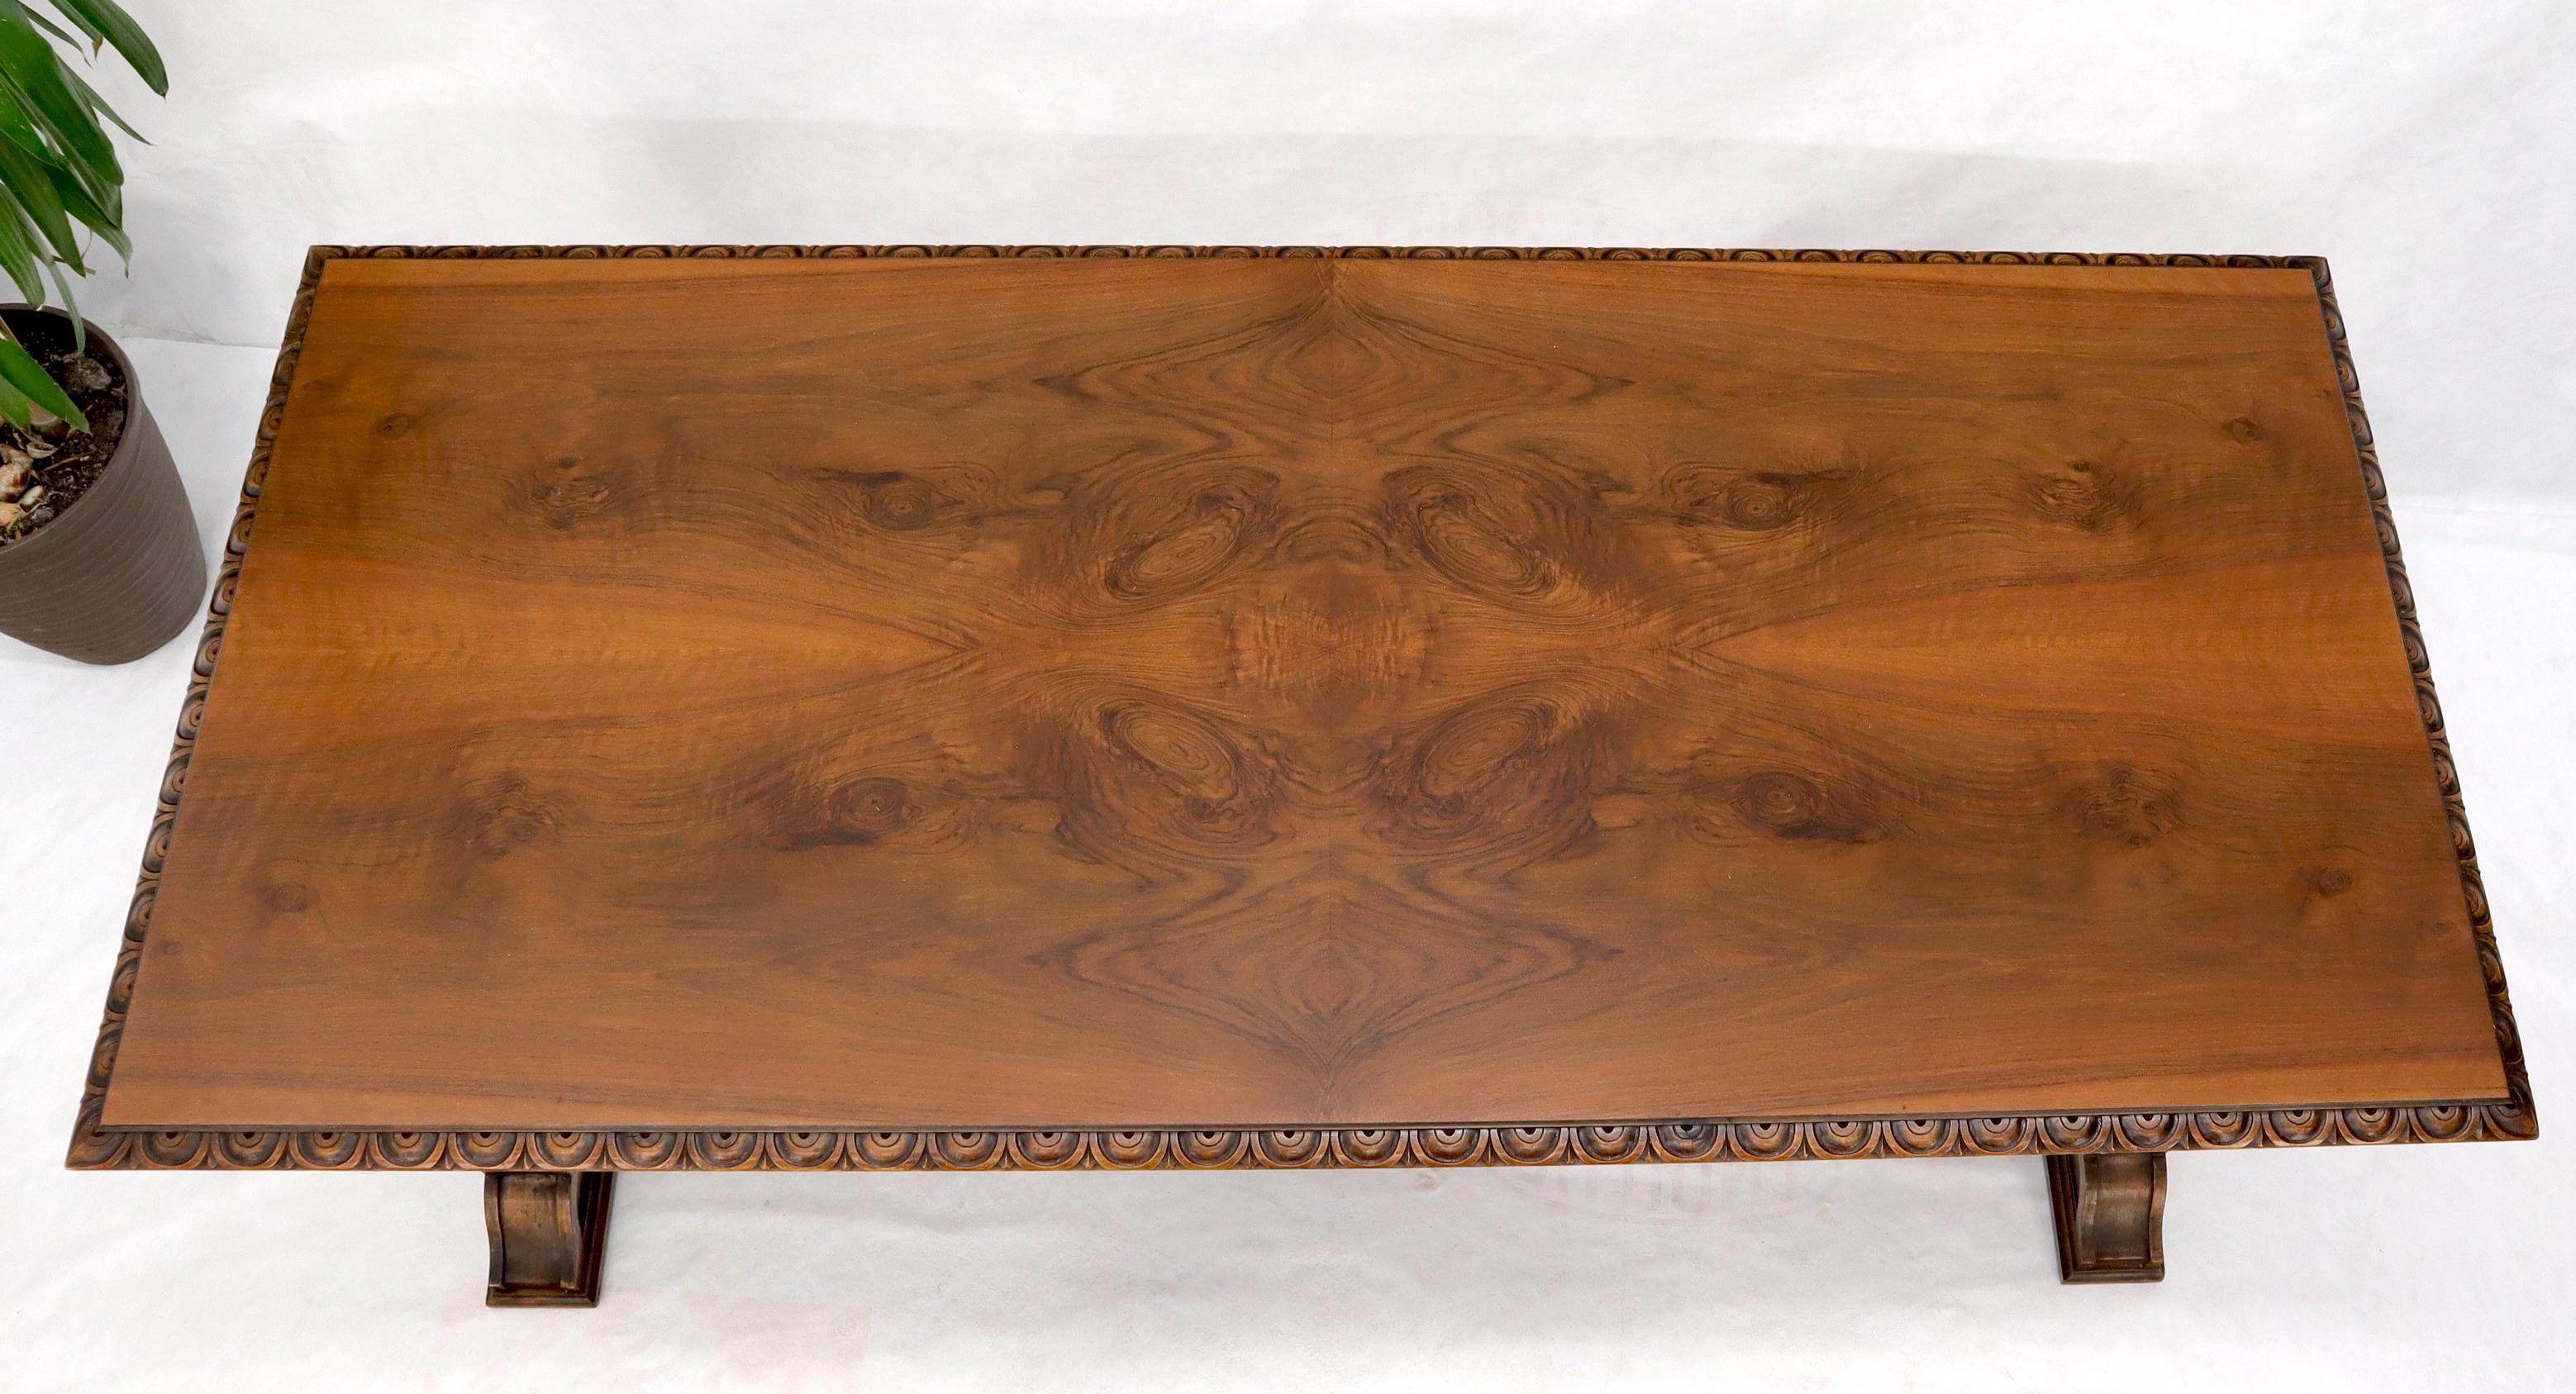 Spanish Colonial Carved Spanish or Italian Walnut Library Table Desk Heavy Carved Base